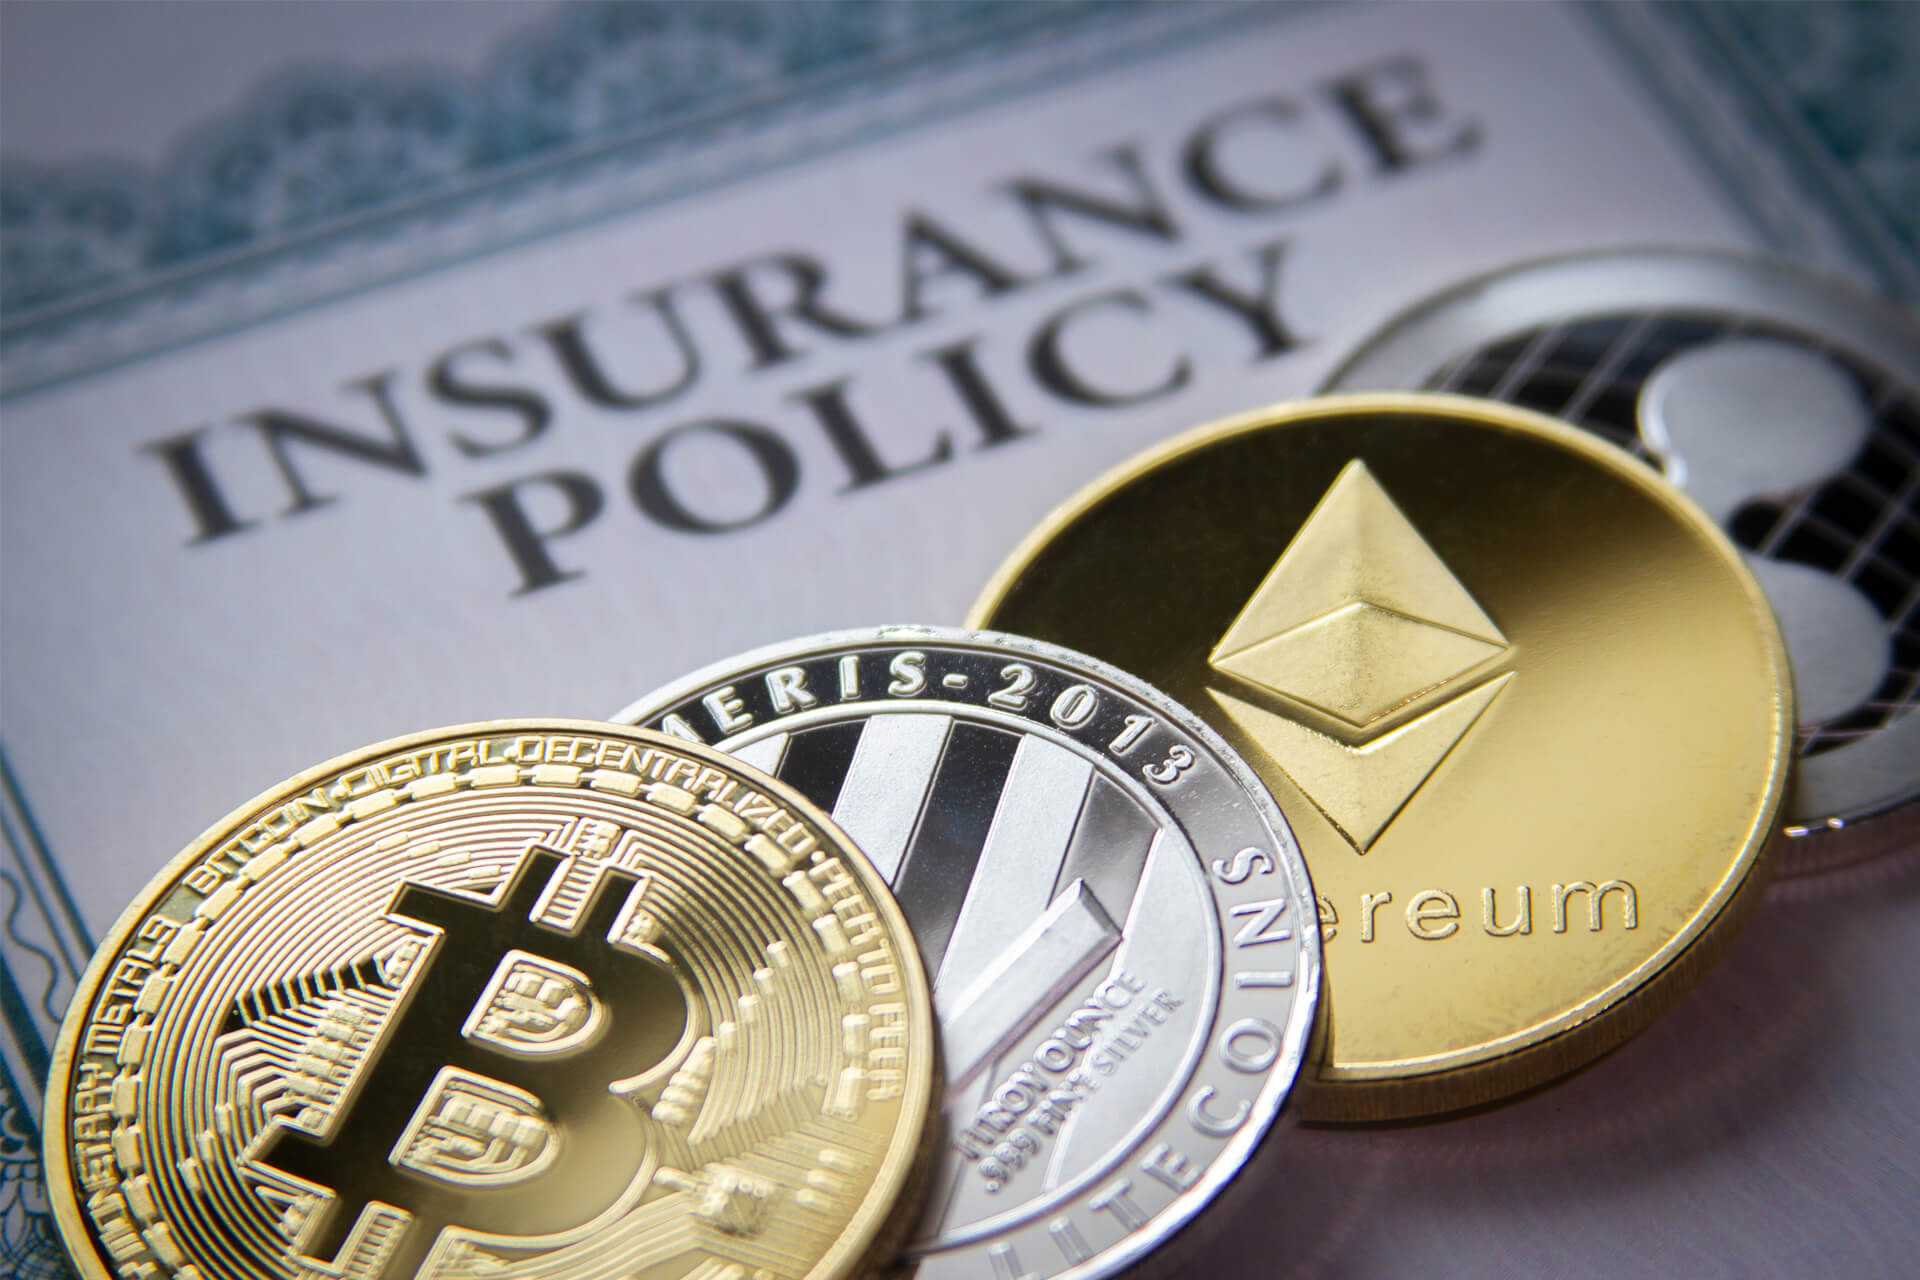 Crypto insurance policy free image download